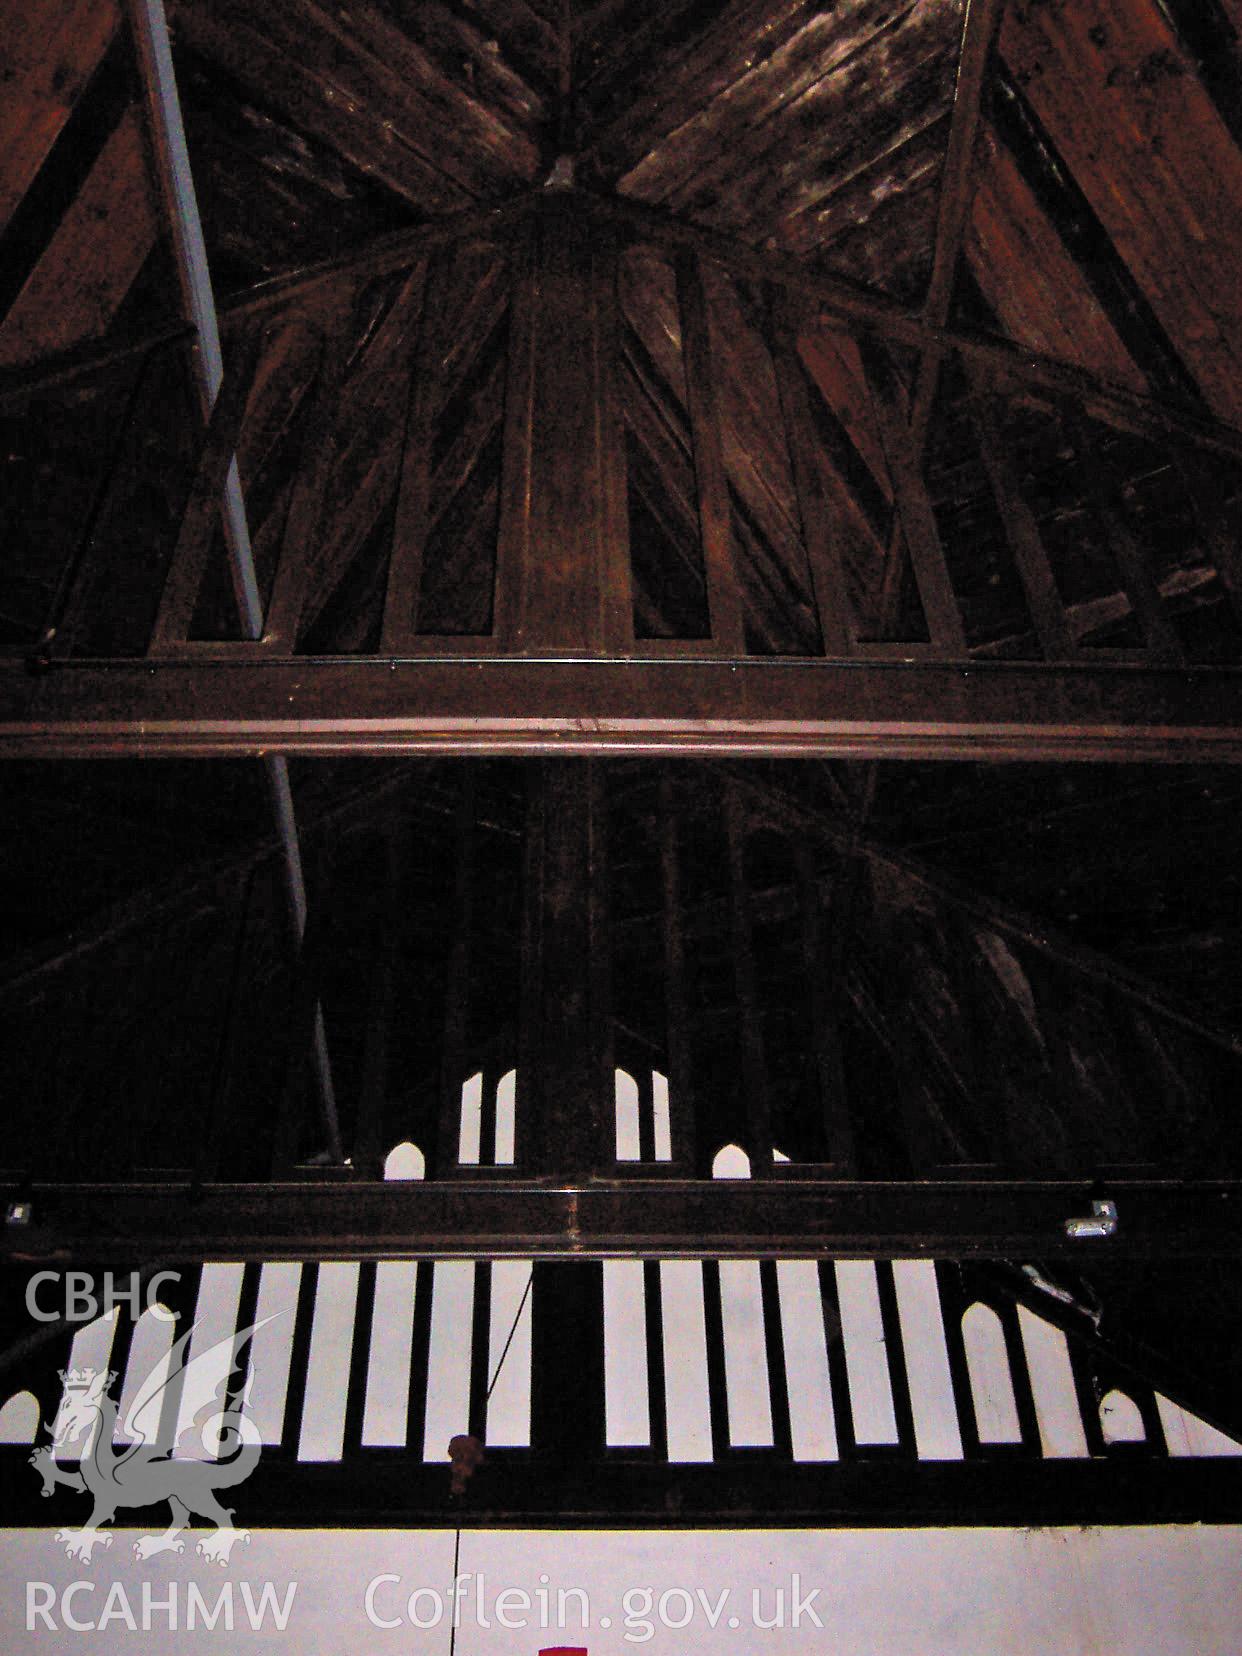 Colour digital photograph showing an interior view of the church roof.